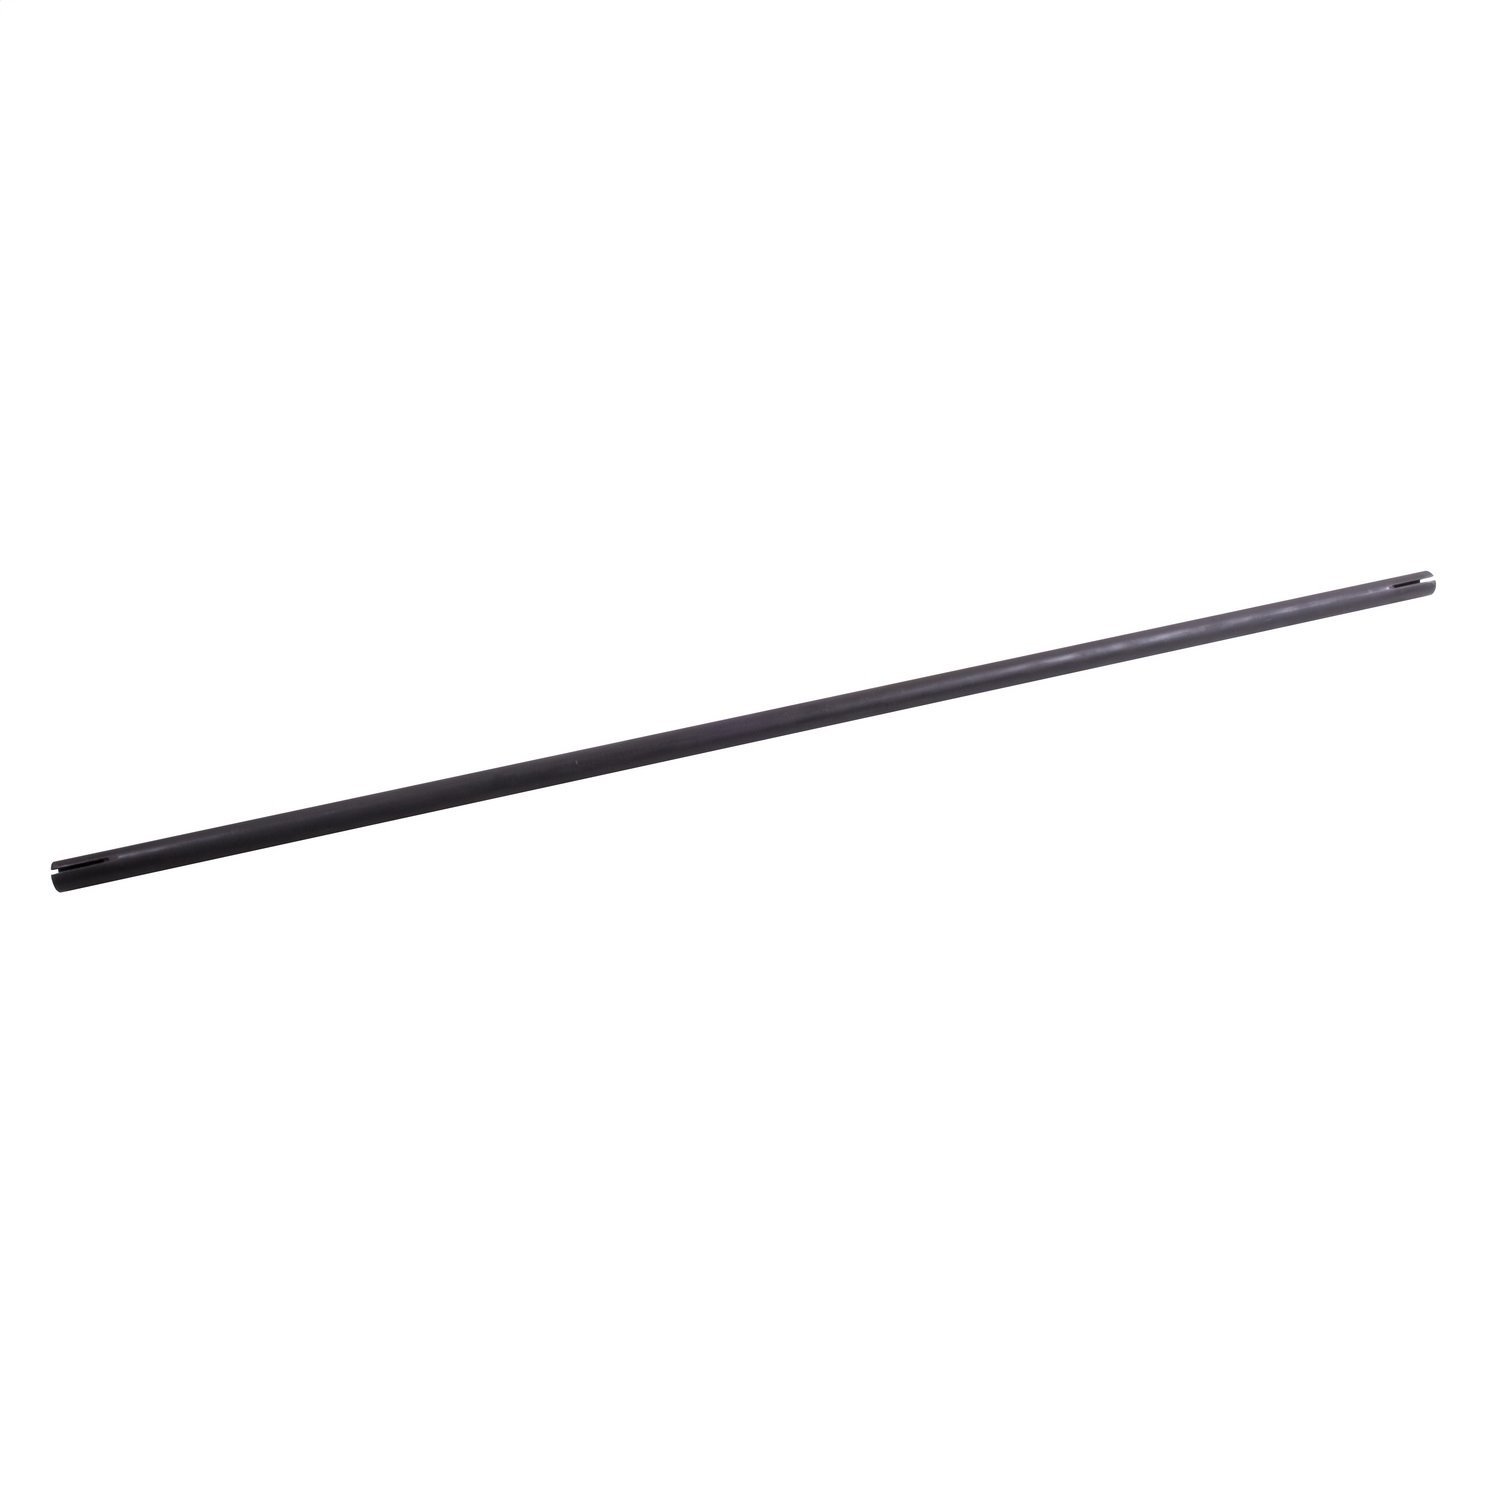 Stock replacement tie rod tube, Fits 82-86 Jeep